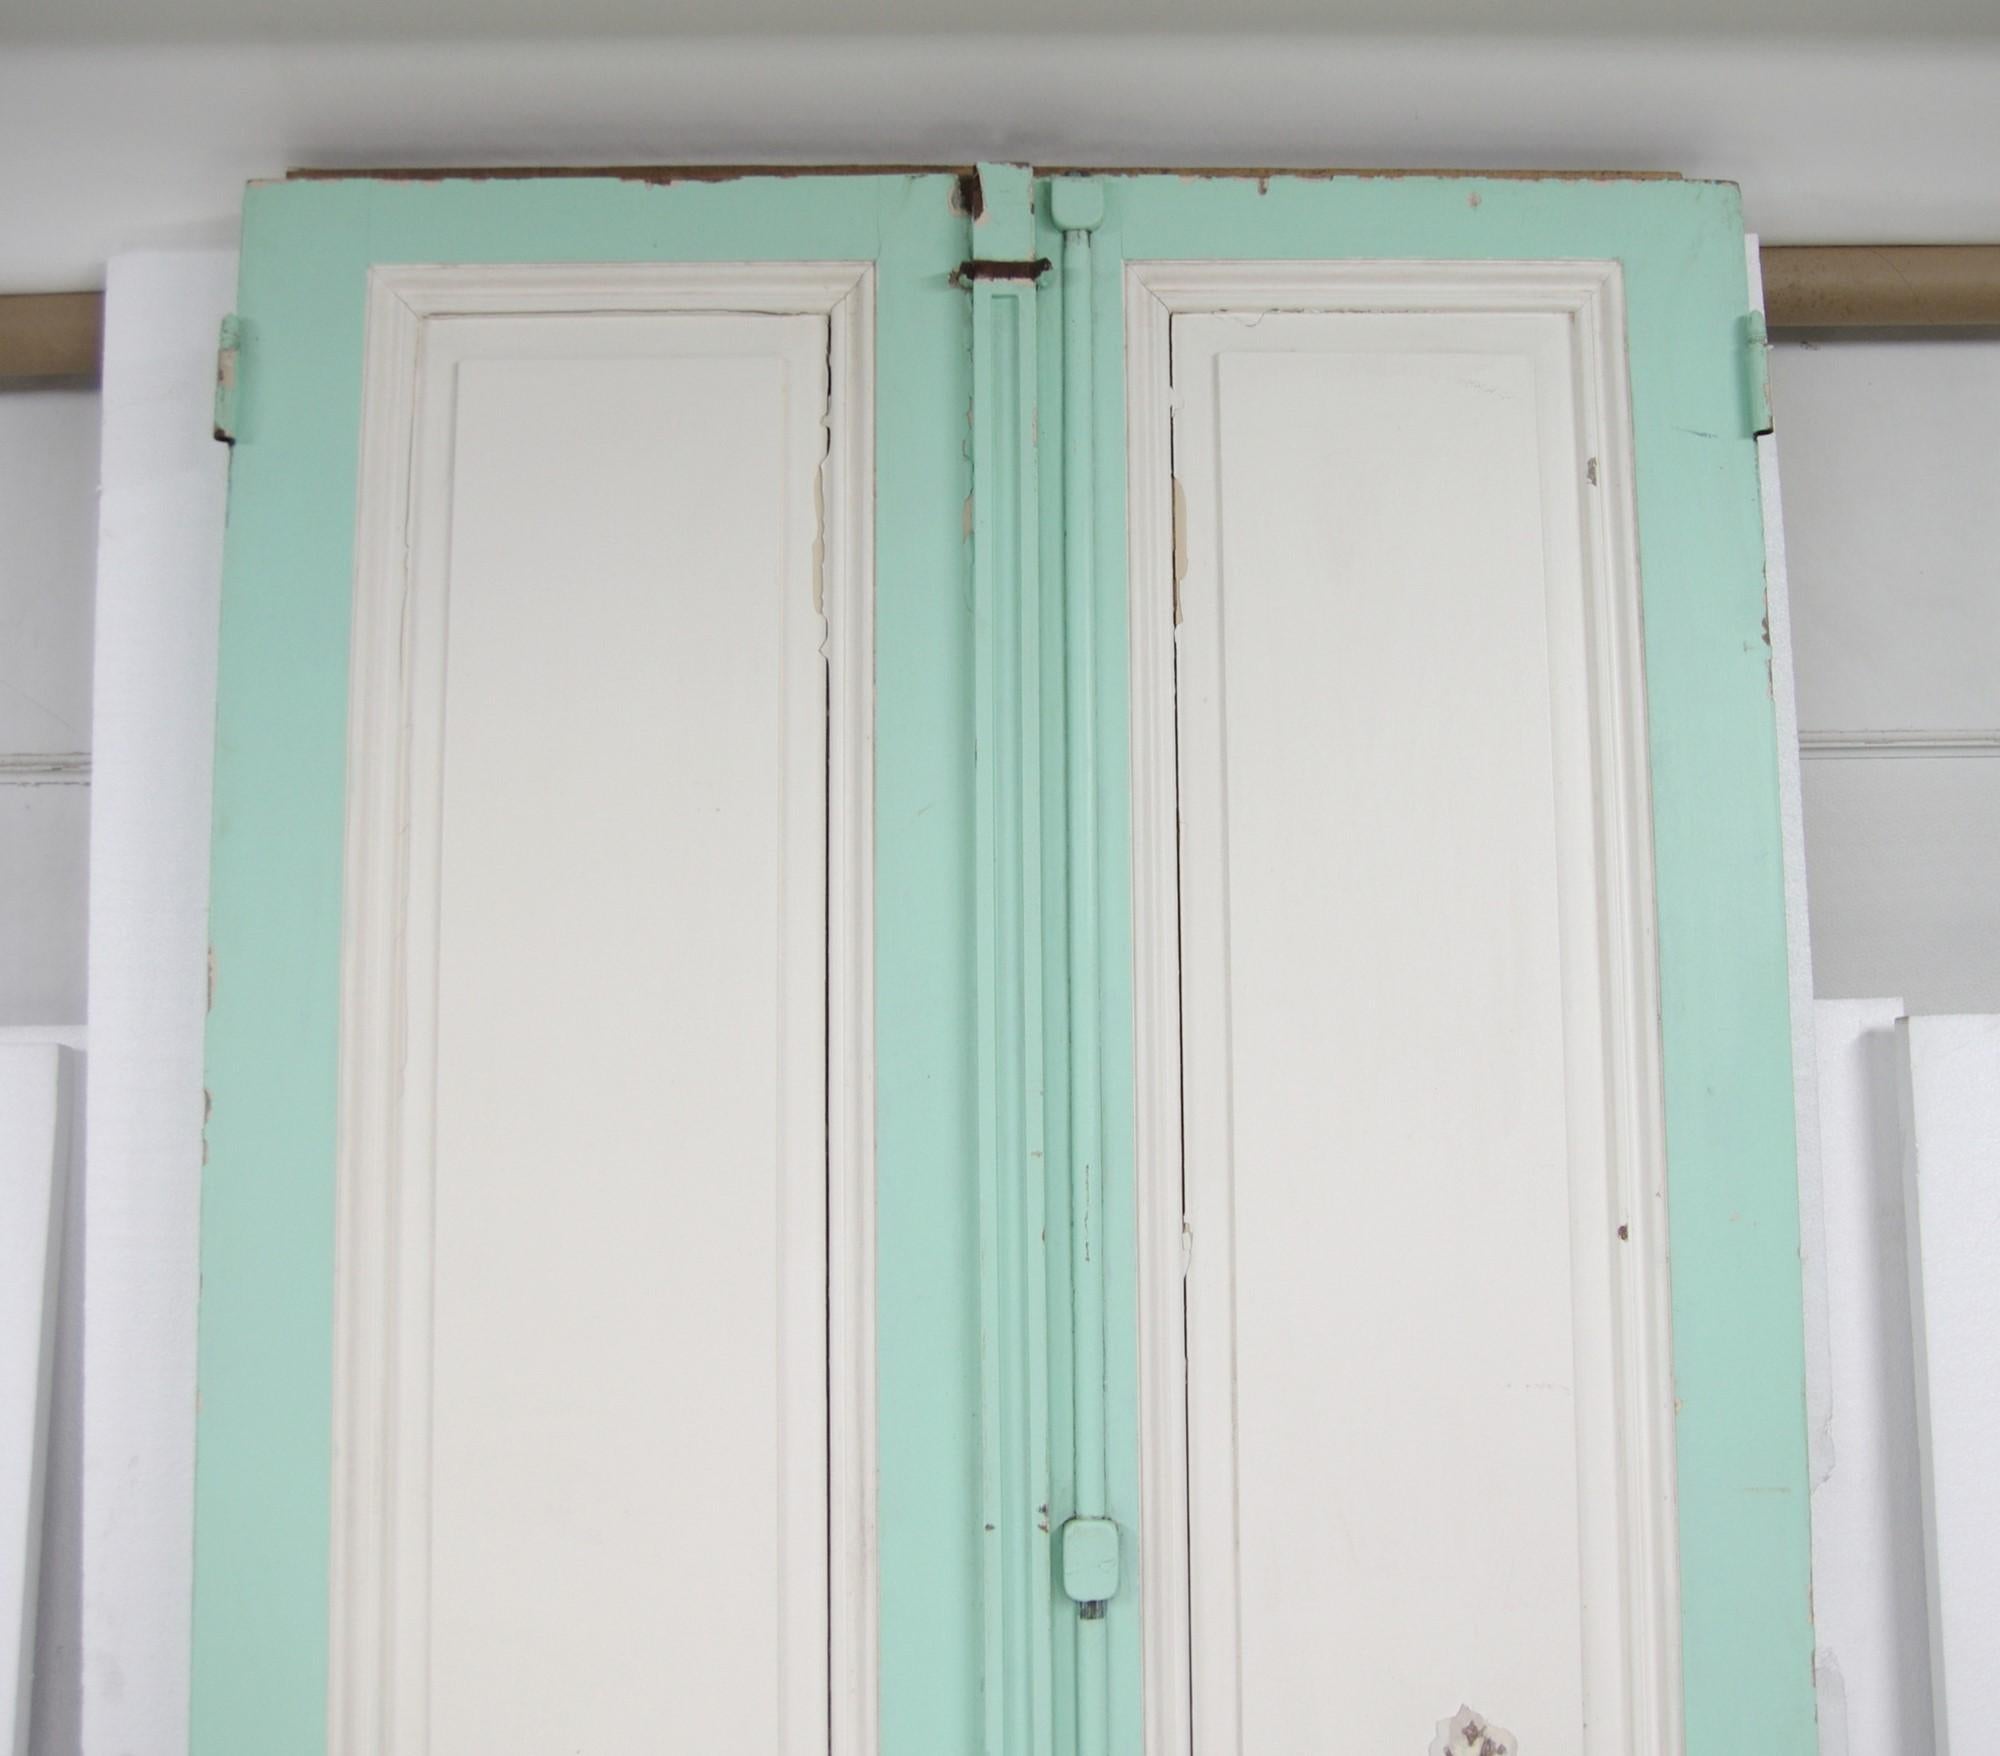 1920's set of tall painted wood parlor doors complete with original cremone bolts. They are from Buenos Aires and are painted white and green on each side and are possibly Spanish Cedar. Priced as a double. This can be seen at our 400 Gilligan St